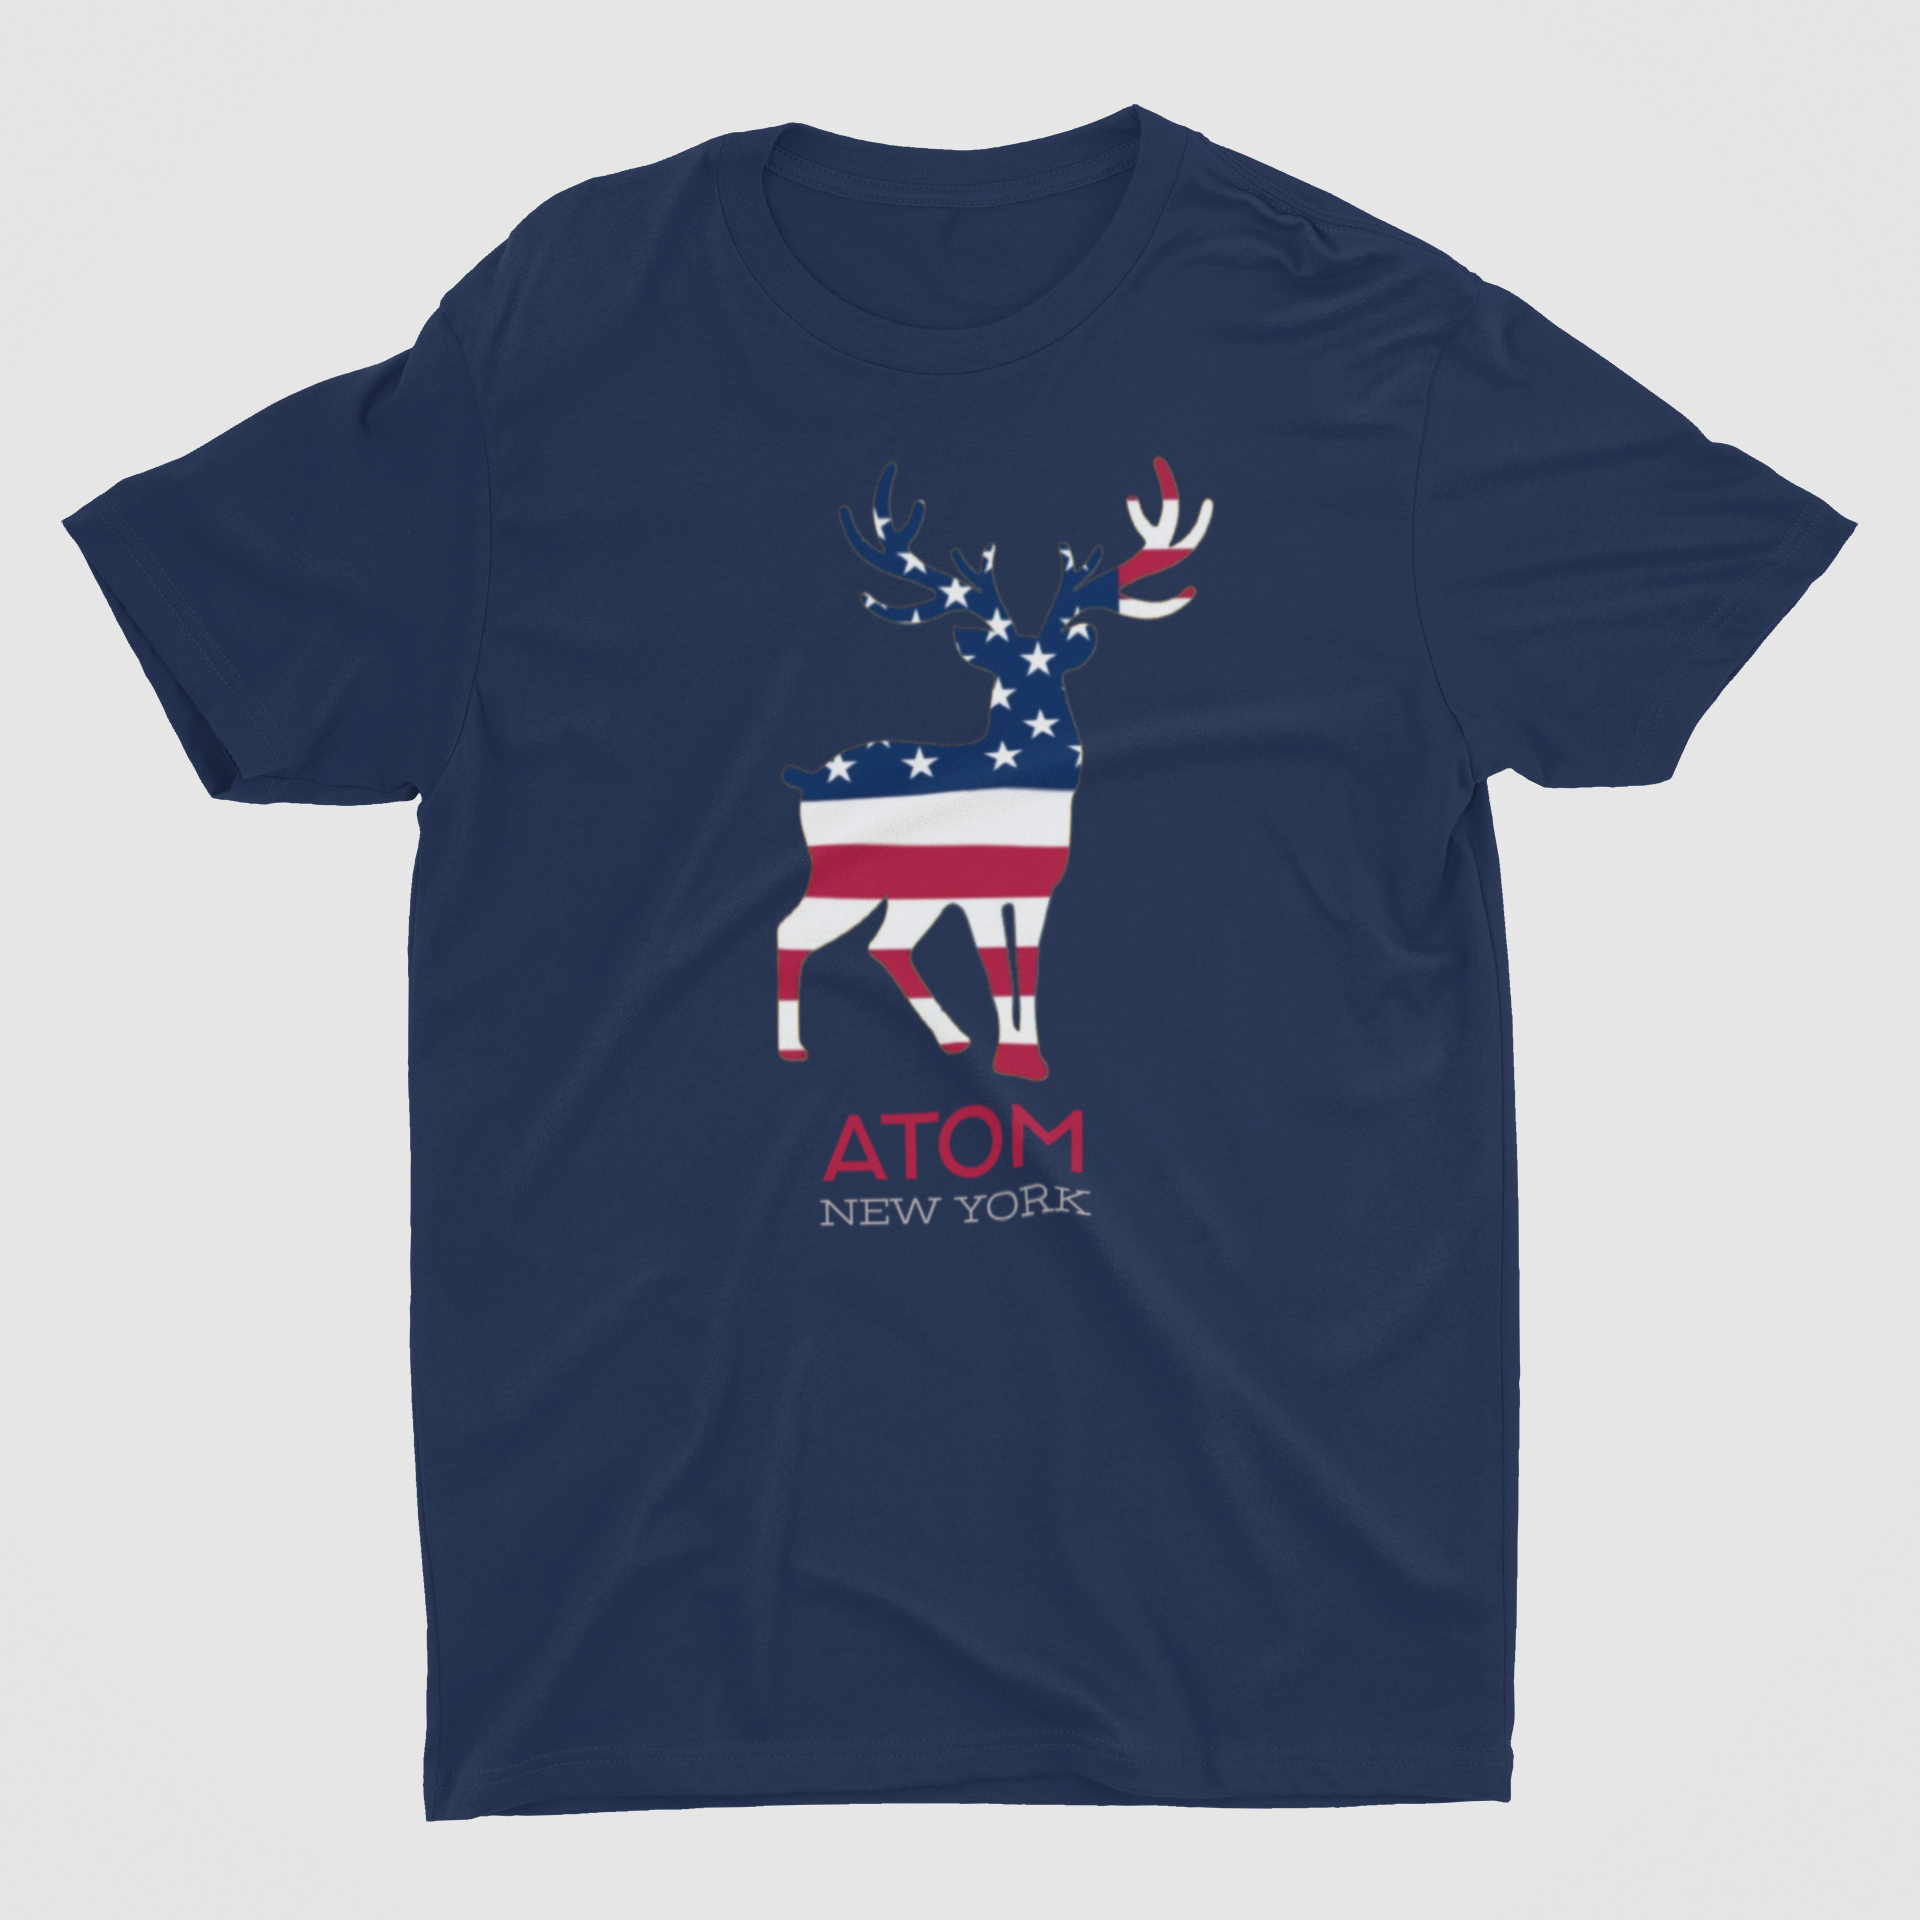 ATOM Signature Icon American Flag Navy Blue T-Shirt For Men